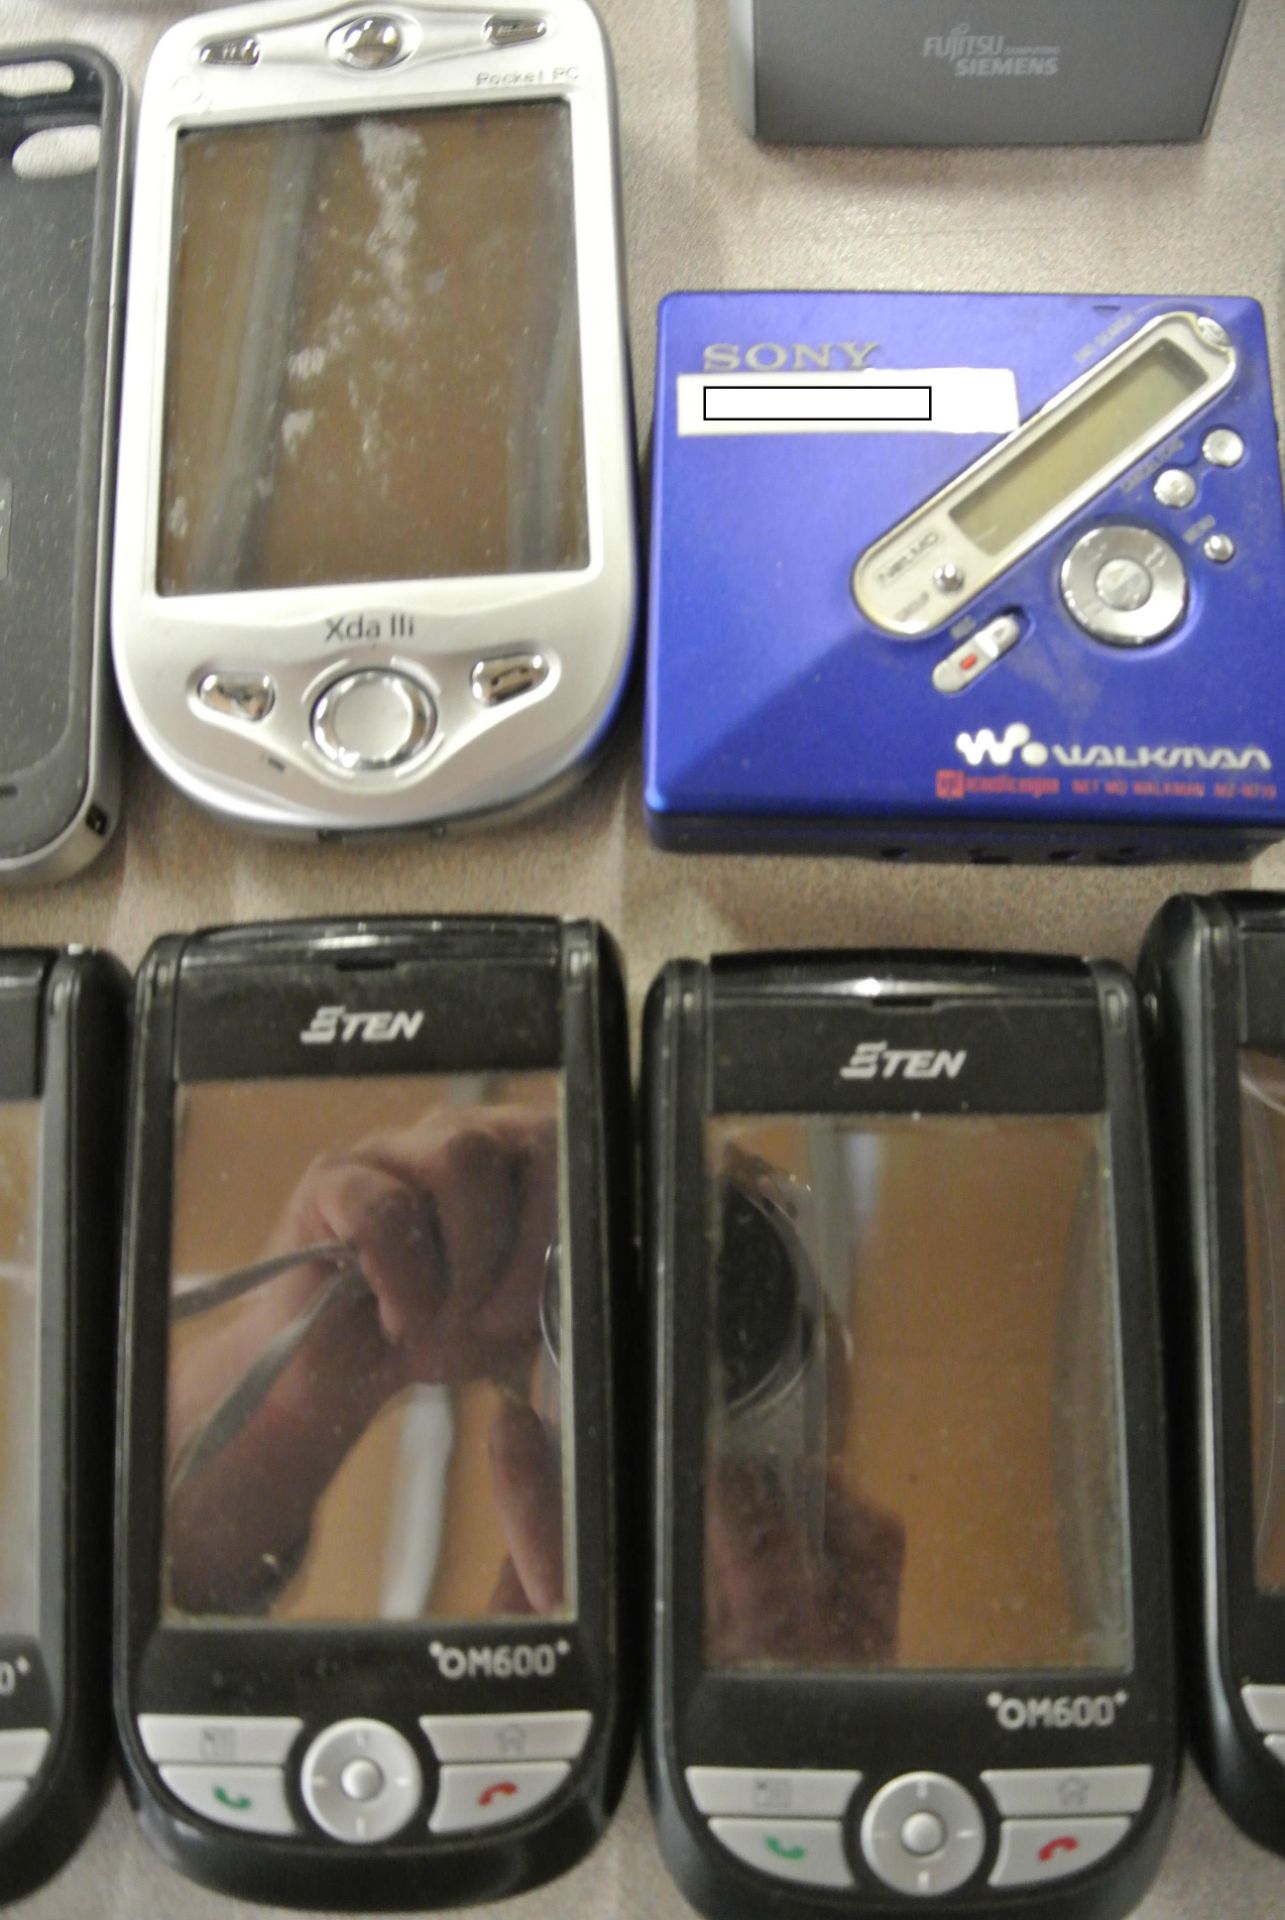 Large lot of multiple mobile phones and accessories, including - 1 x ETEN Pocket PC + 5 x ETEN OM600 - Image 6 of 7